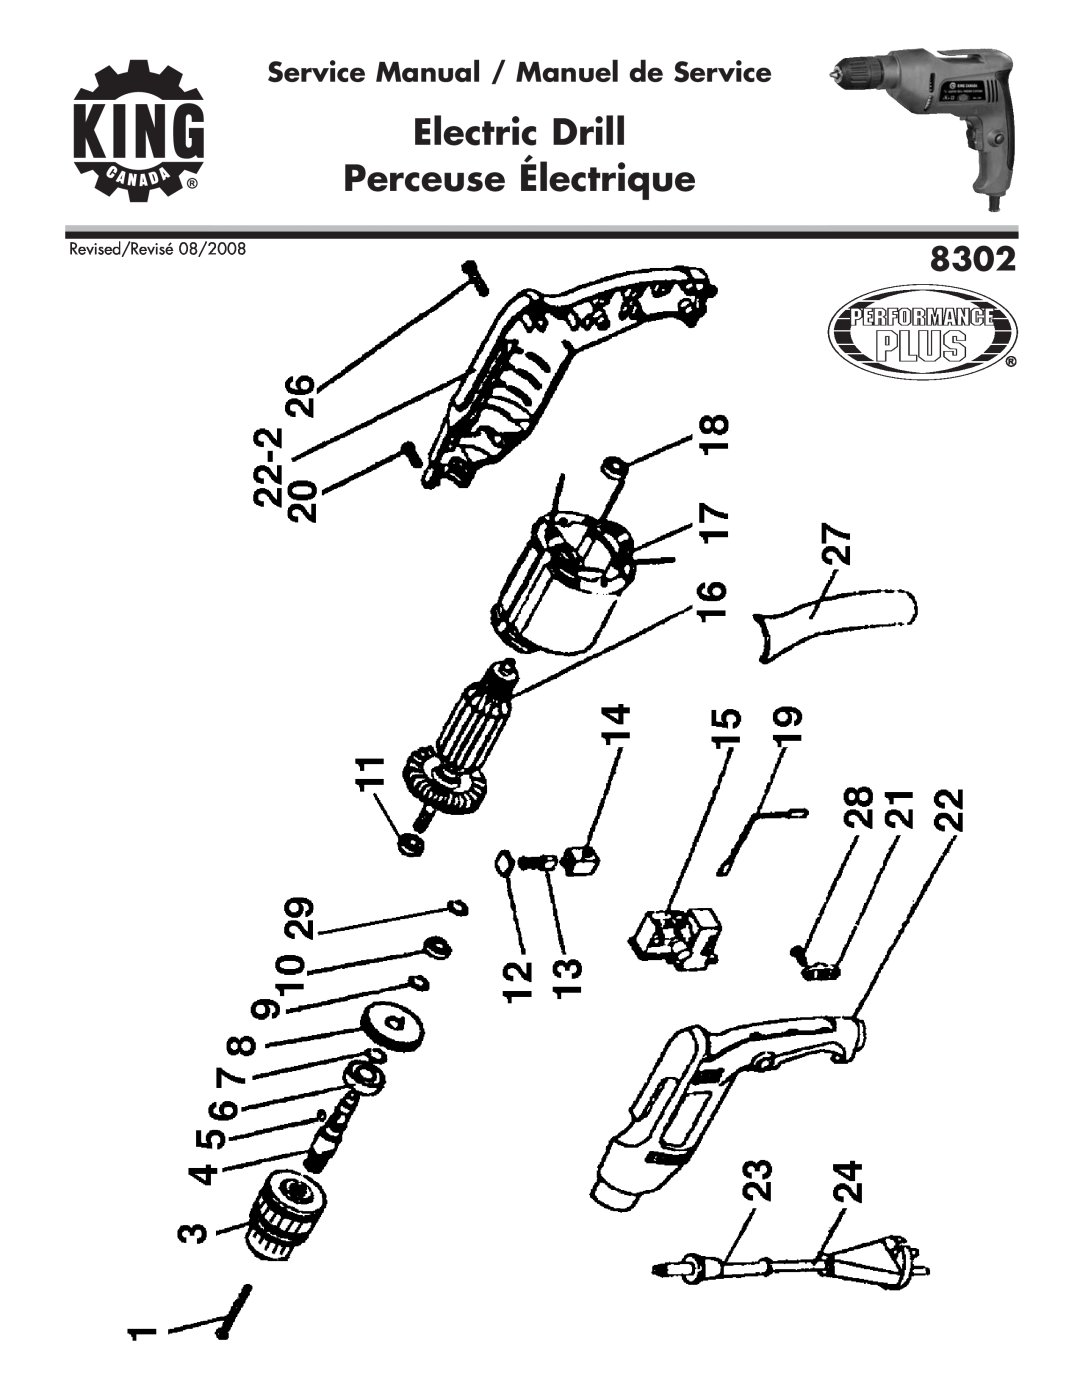 King Canada 8302 service manual Electric Drill Perceuse Électrique, Service Manual / Manuel de Service 